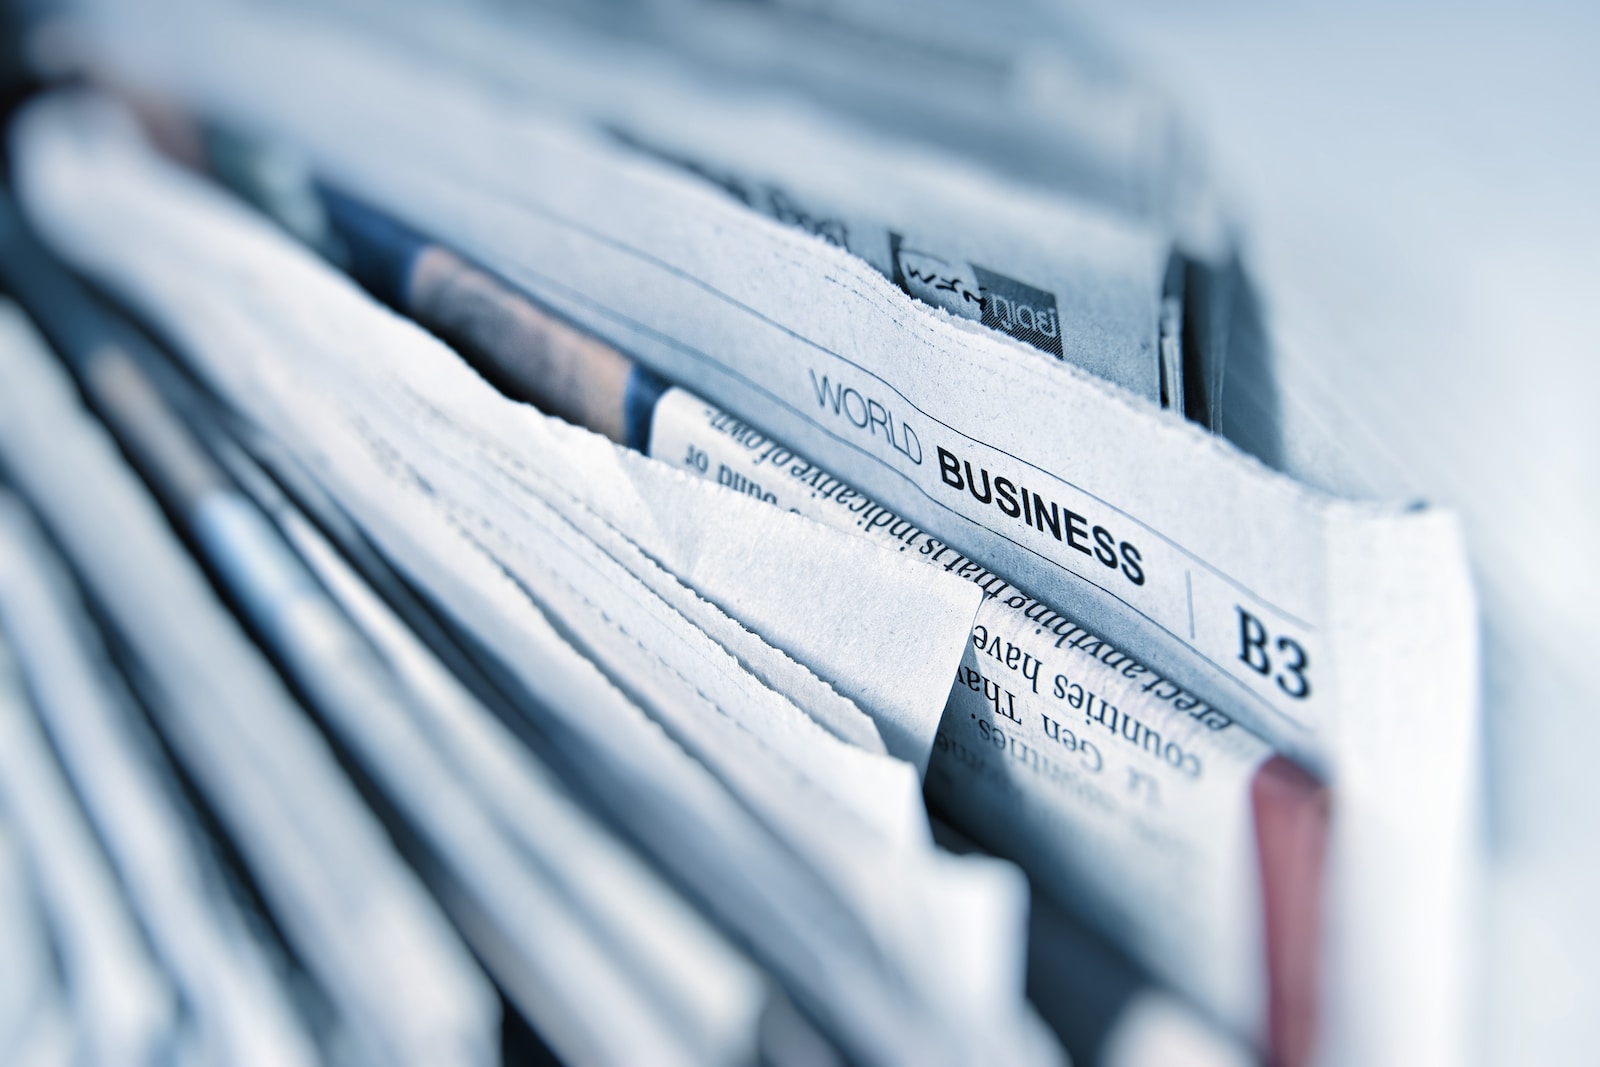 Adapting To Change: How Traditional Print Media Is Responding To The Rise Of Online Journalism